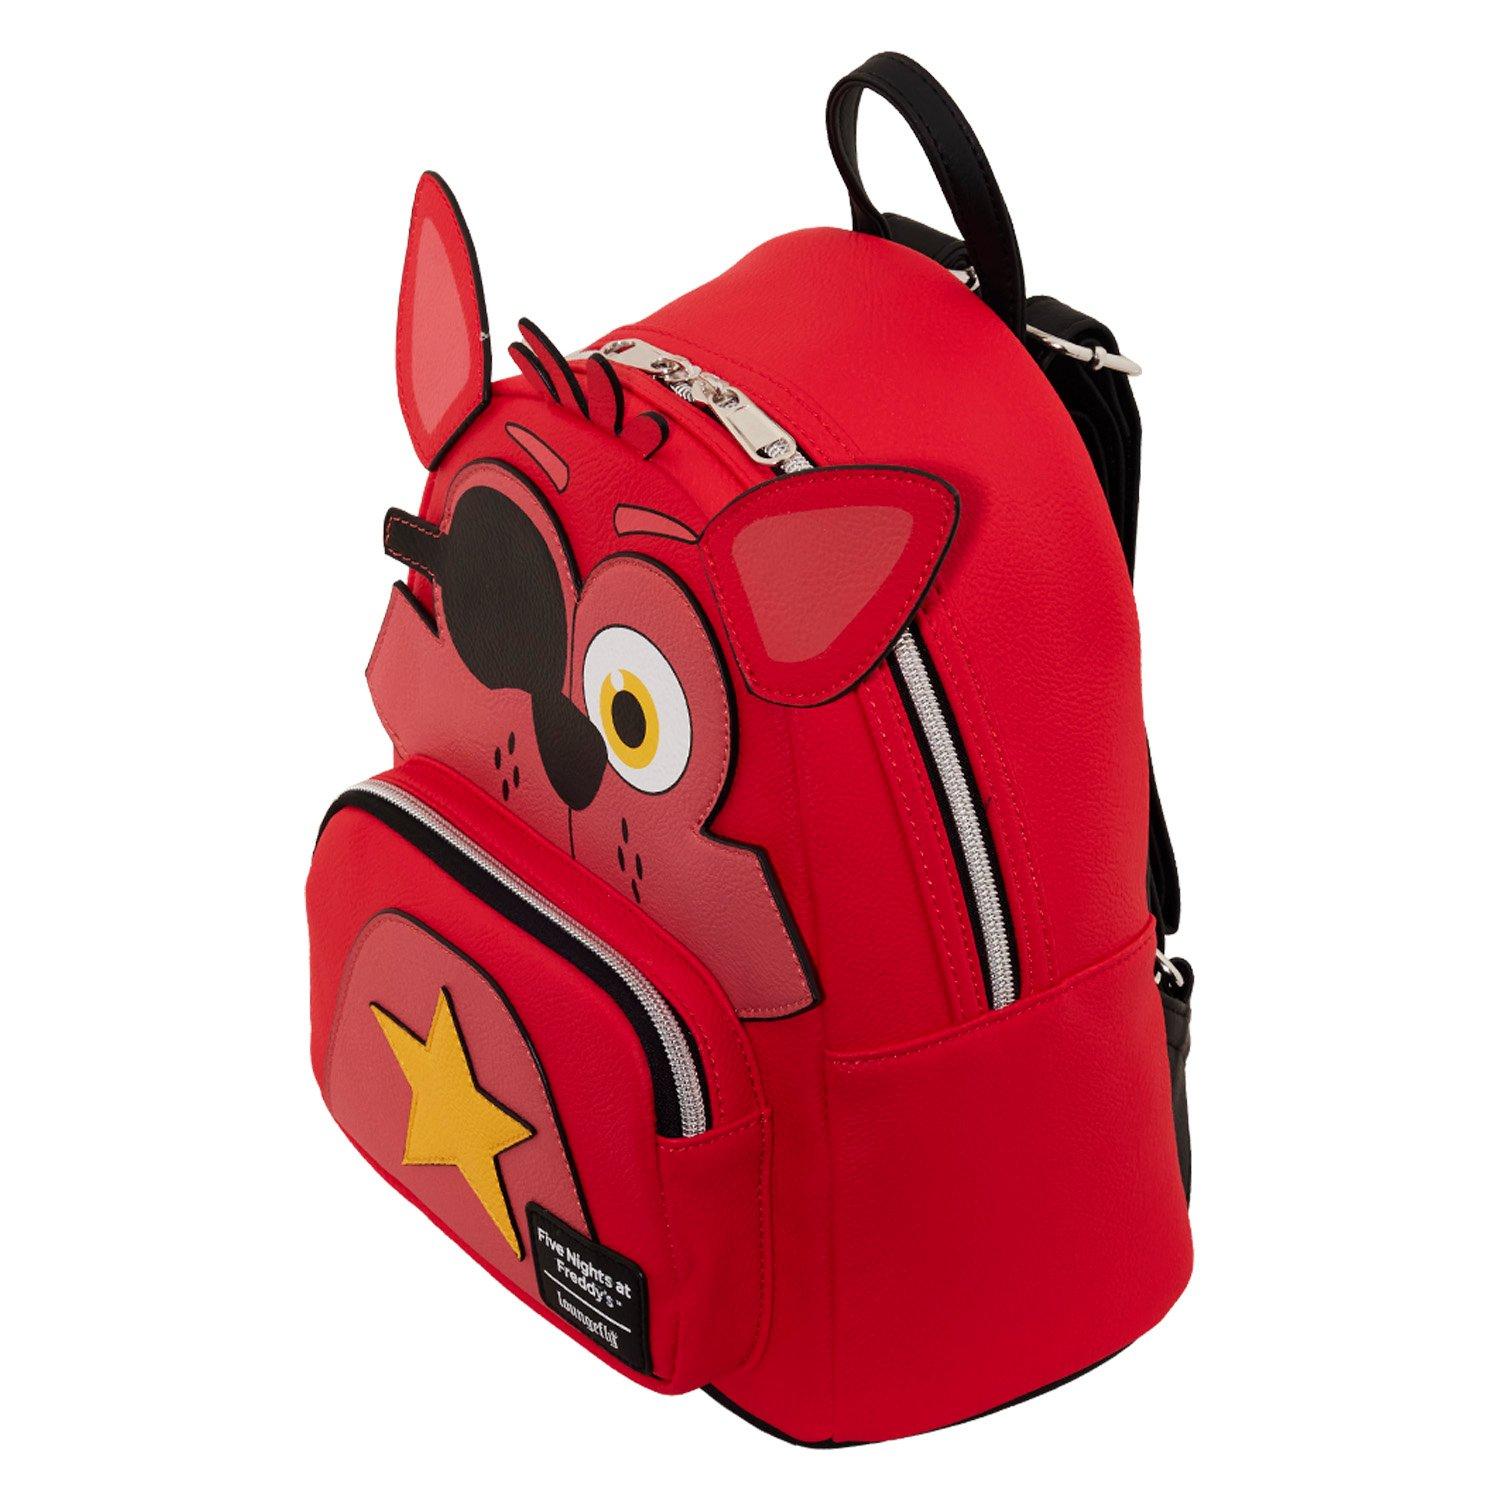 Five Nights At Freddy's Backpack